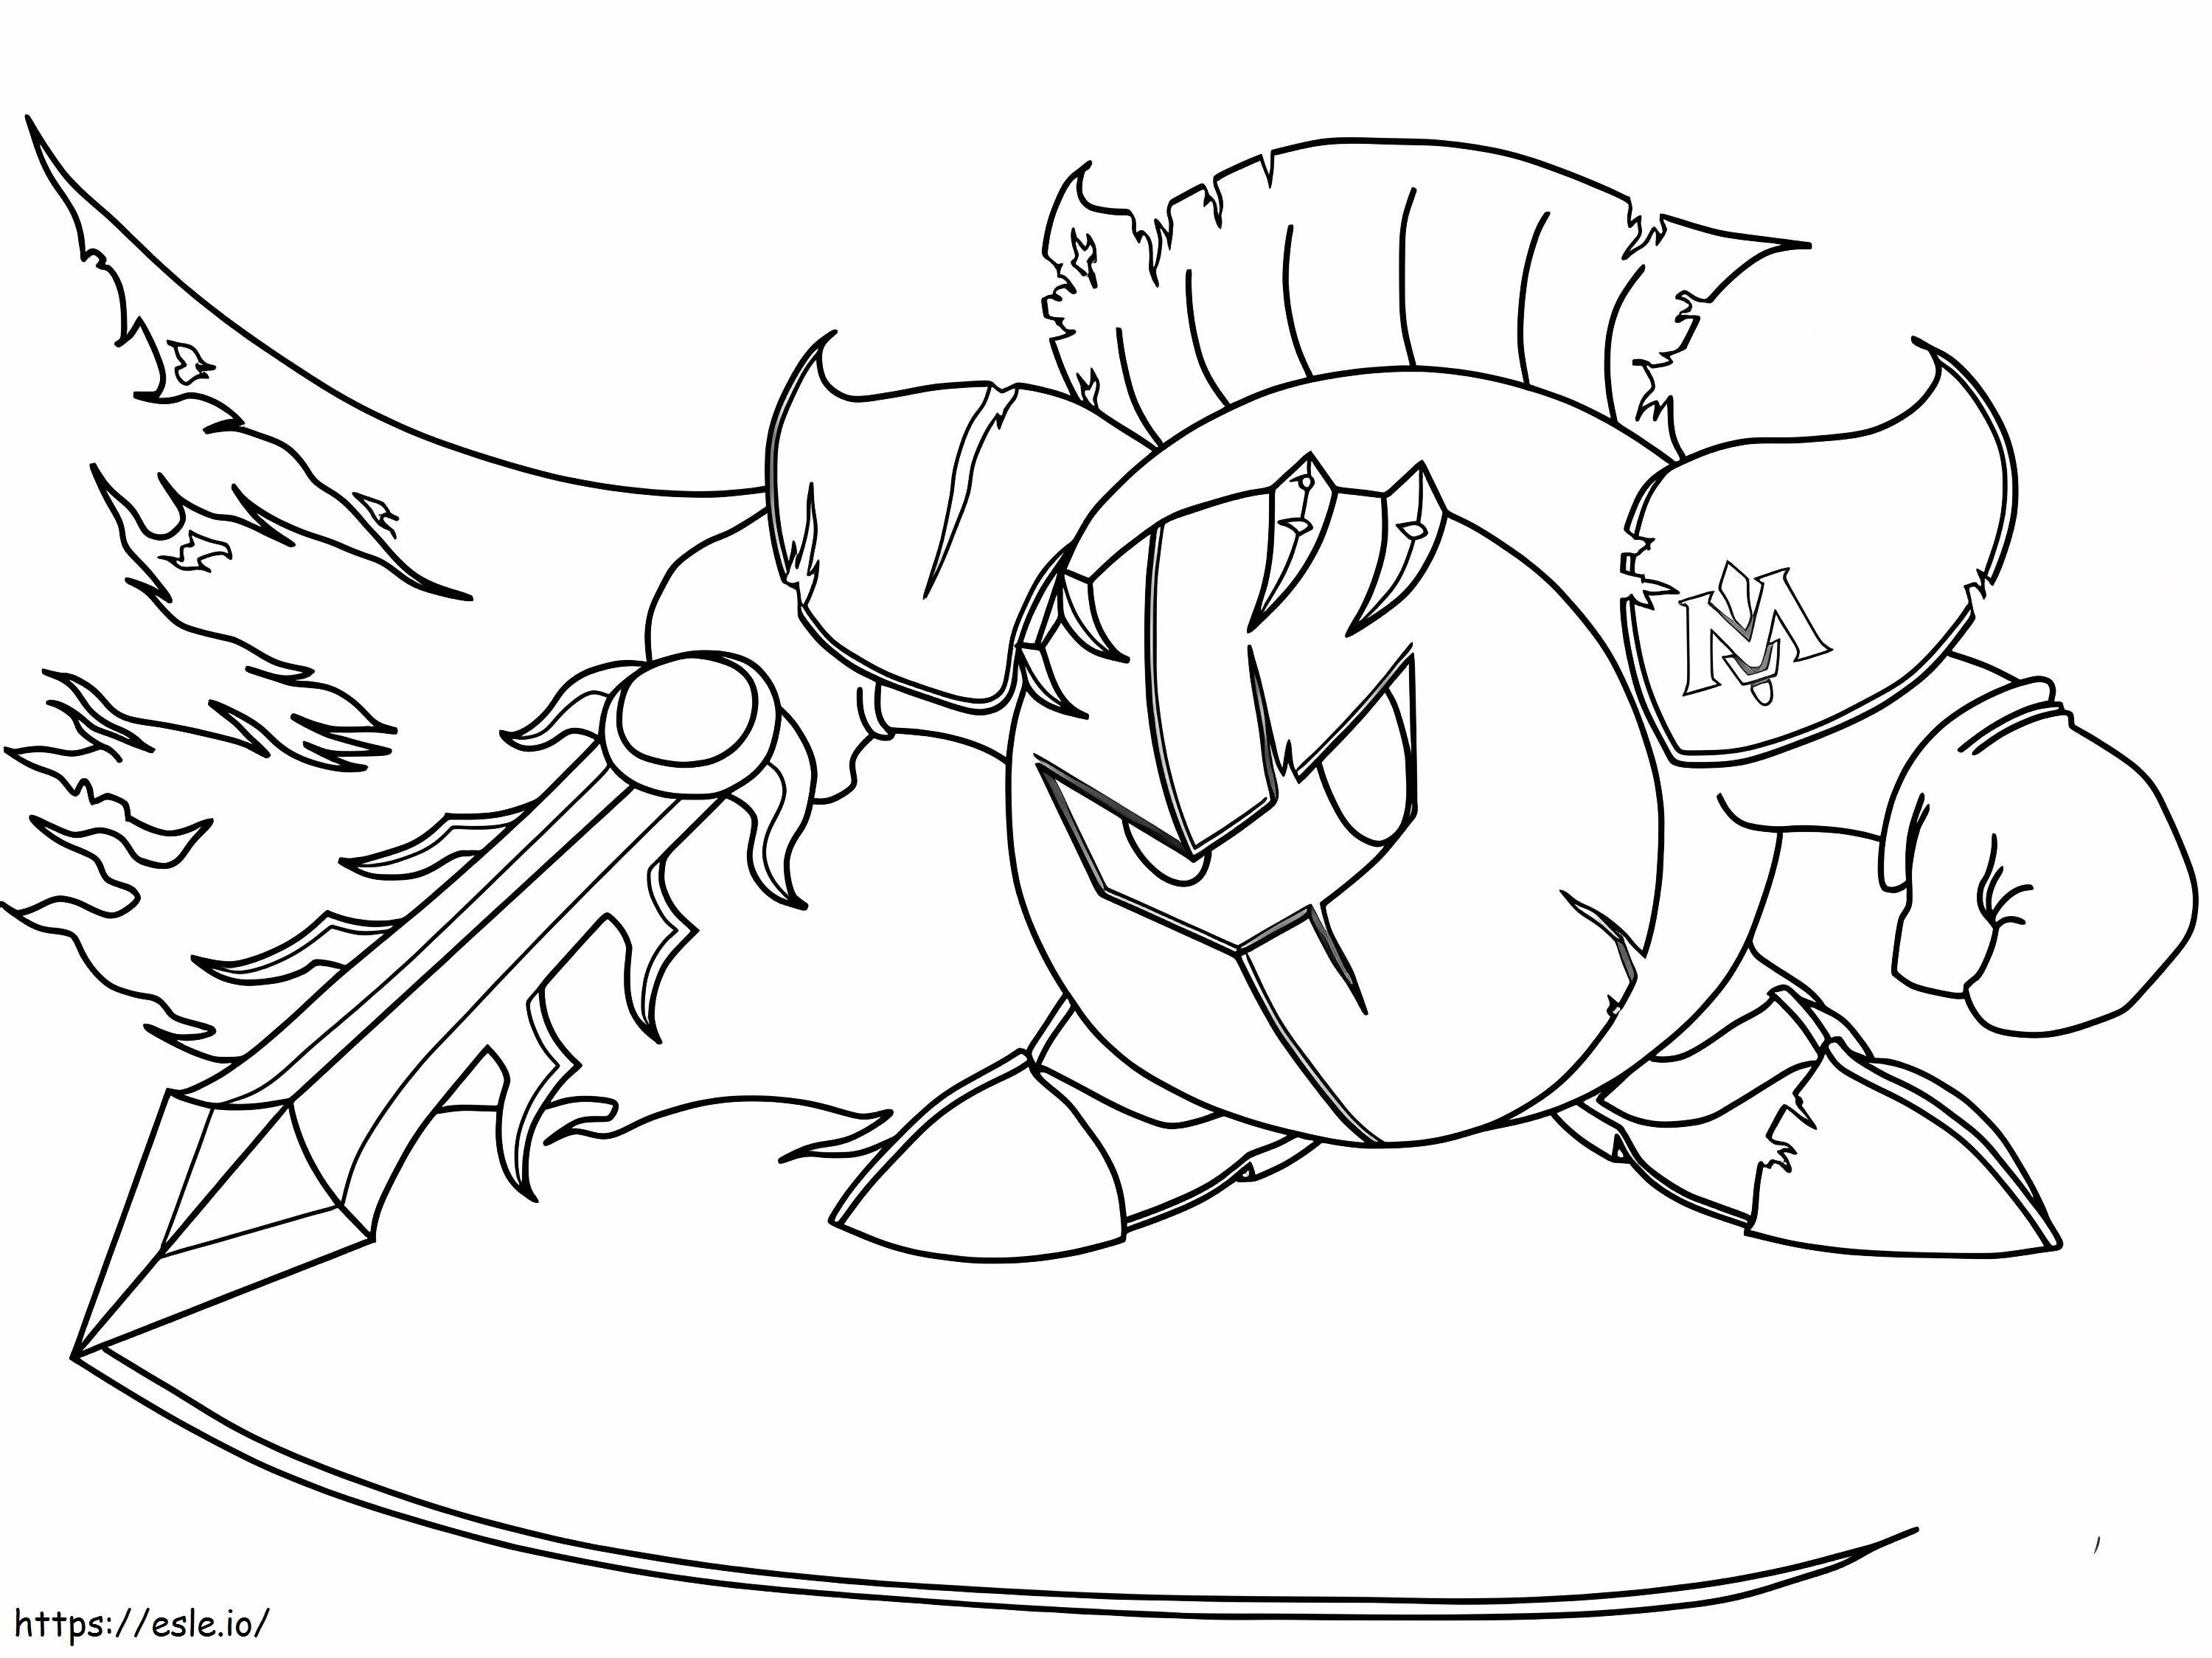 Meta Knight 8 coloring page